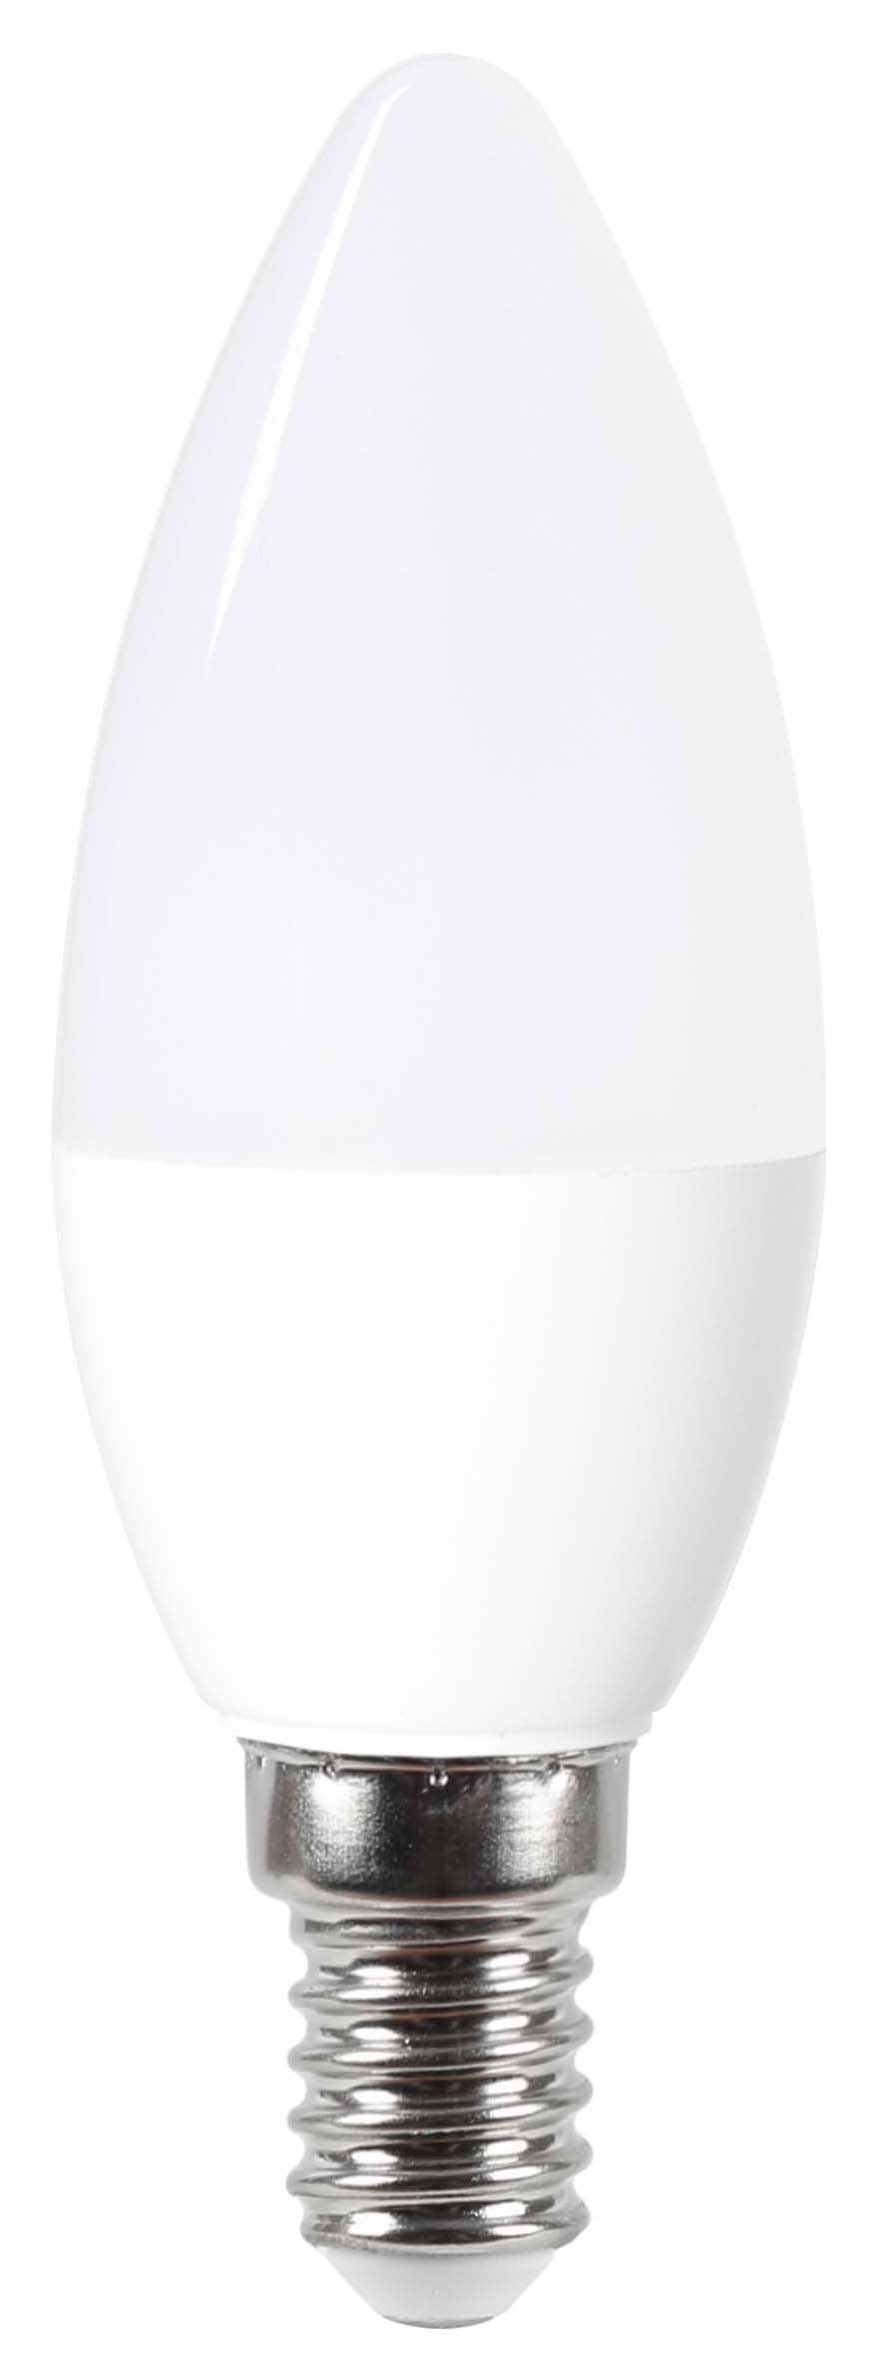 Wickes Non-Dimmable Opal LED E14 Candle 4.9W Warm White Light Bulb